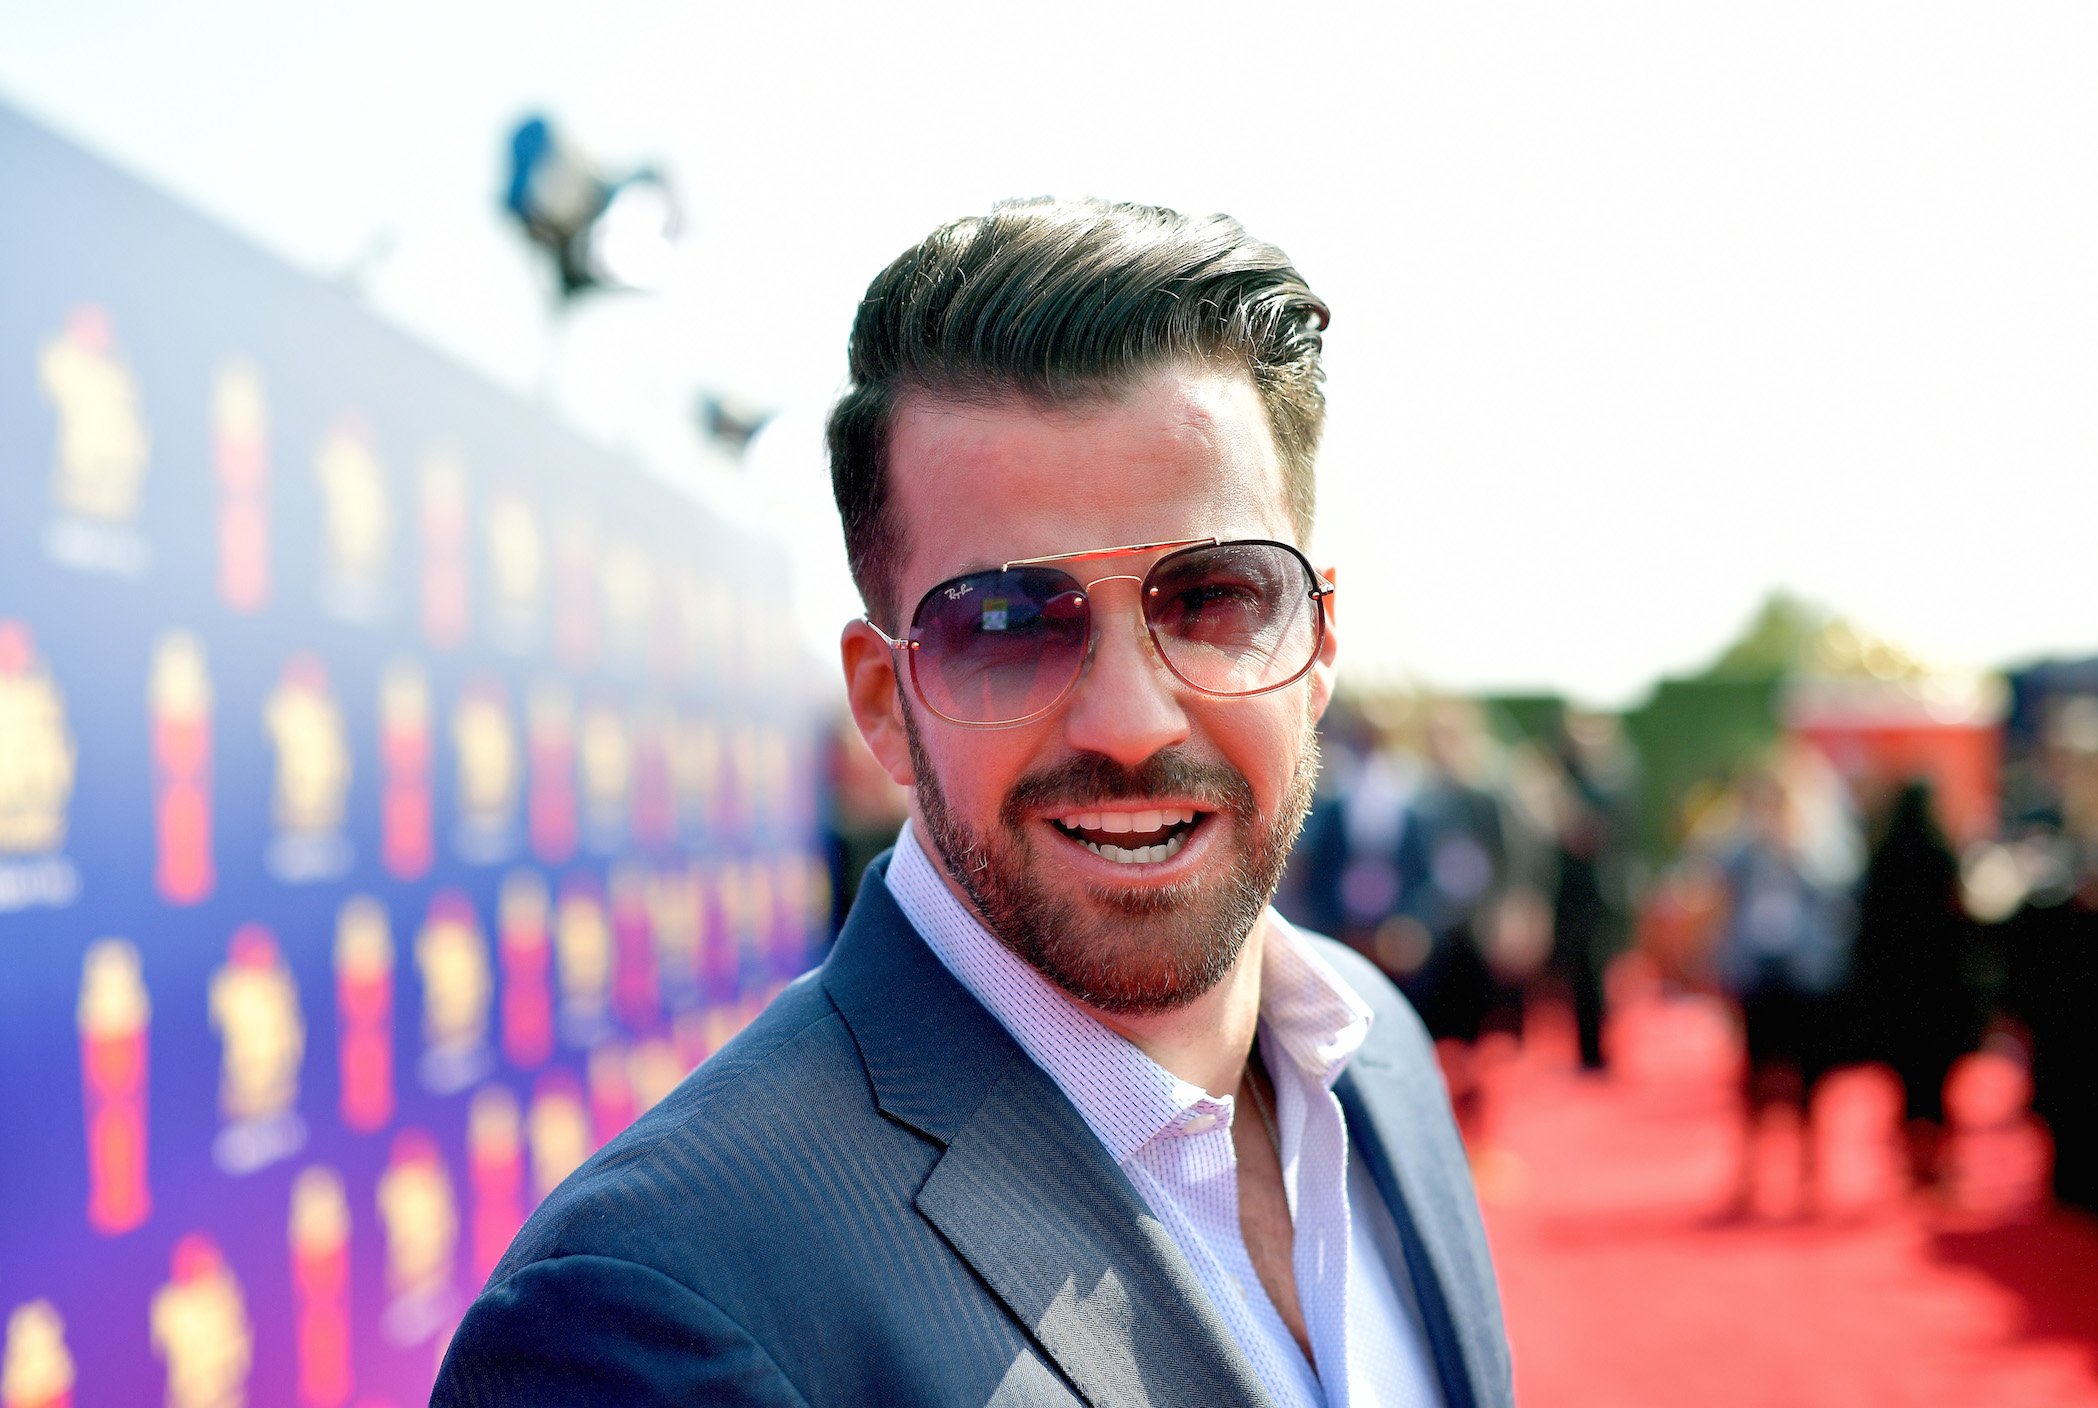 Johnny 'Bananas' Devenanzio from MTV's 'The Challenge' smiling into the camera while at a red carpet awards show